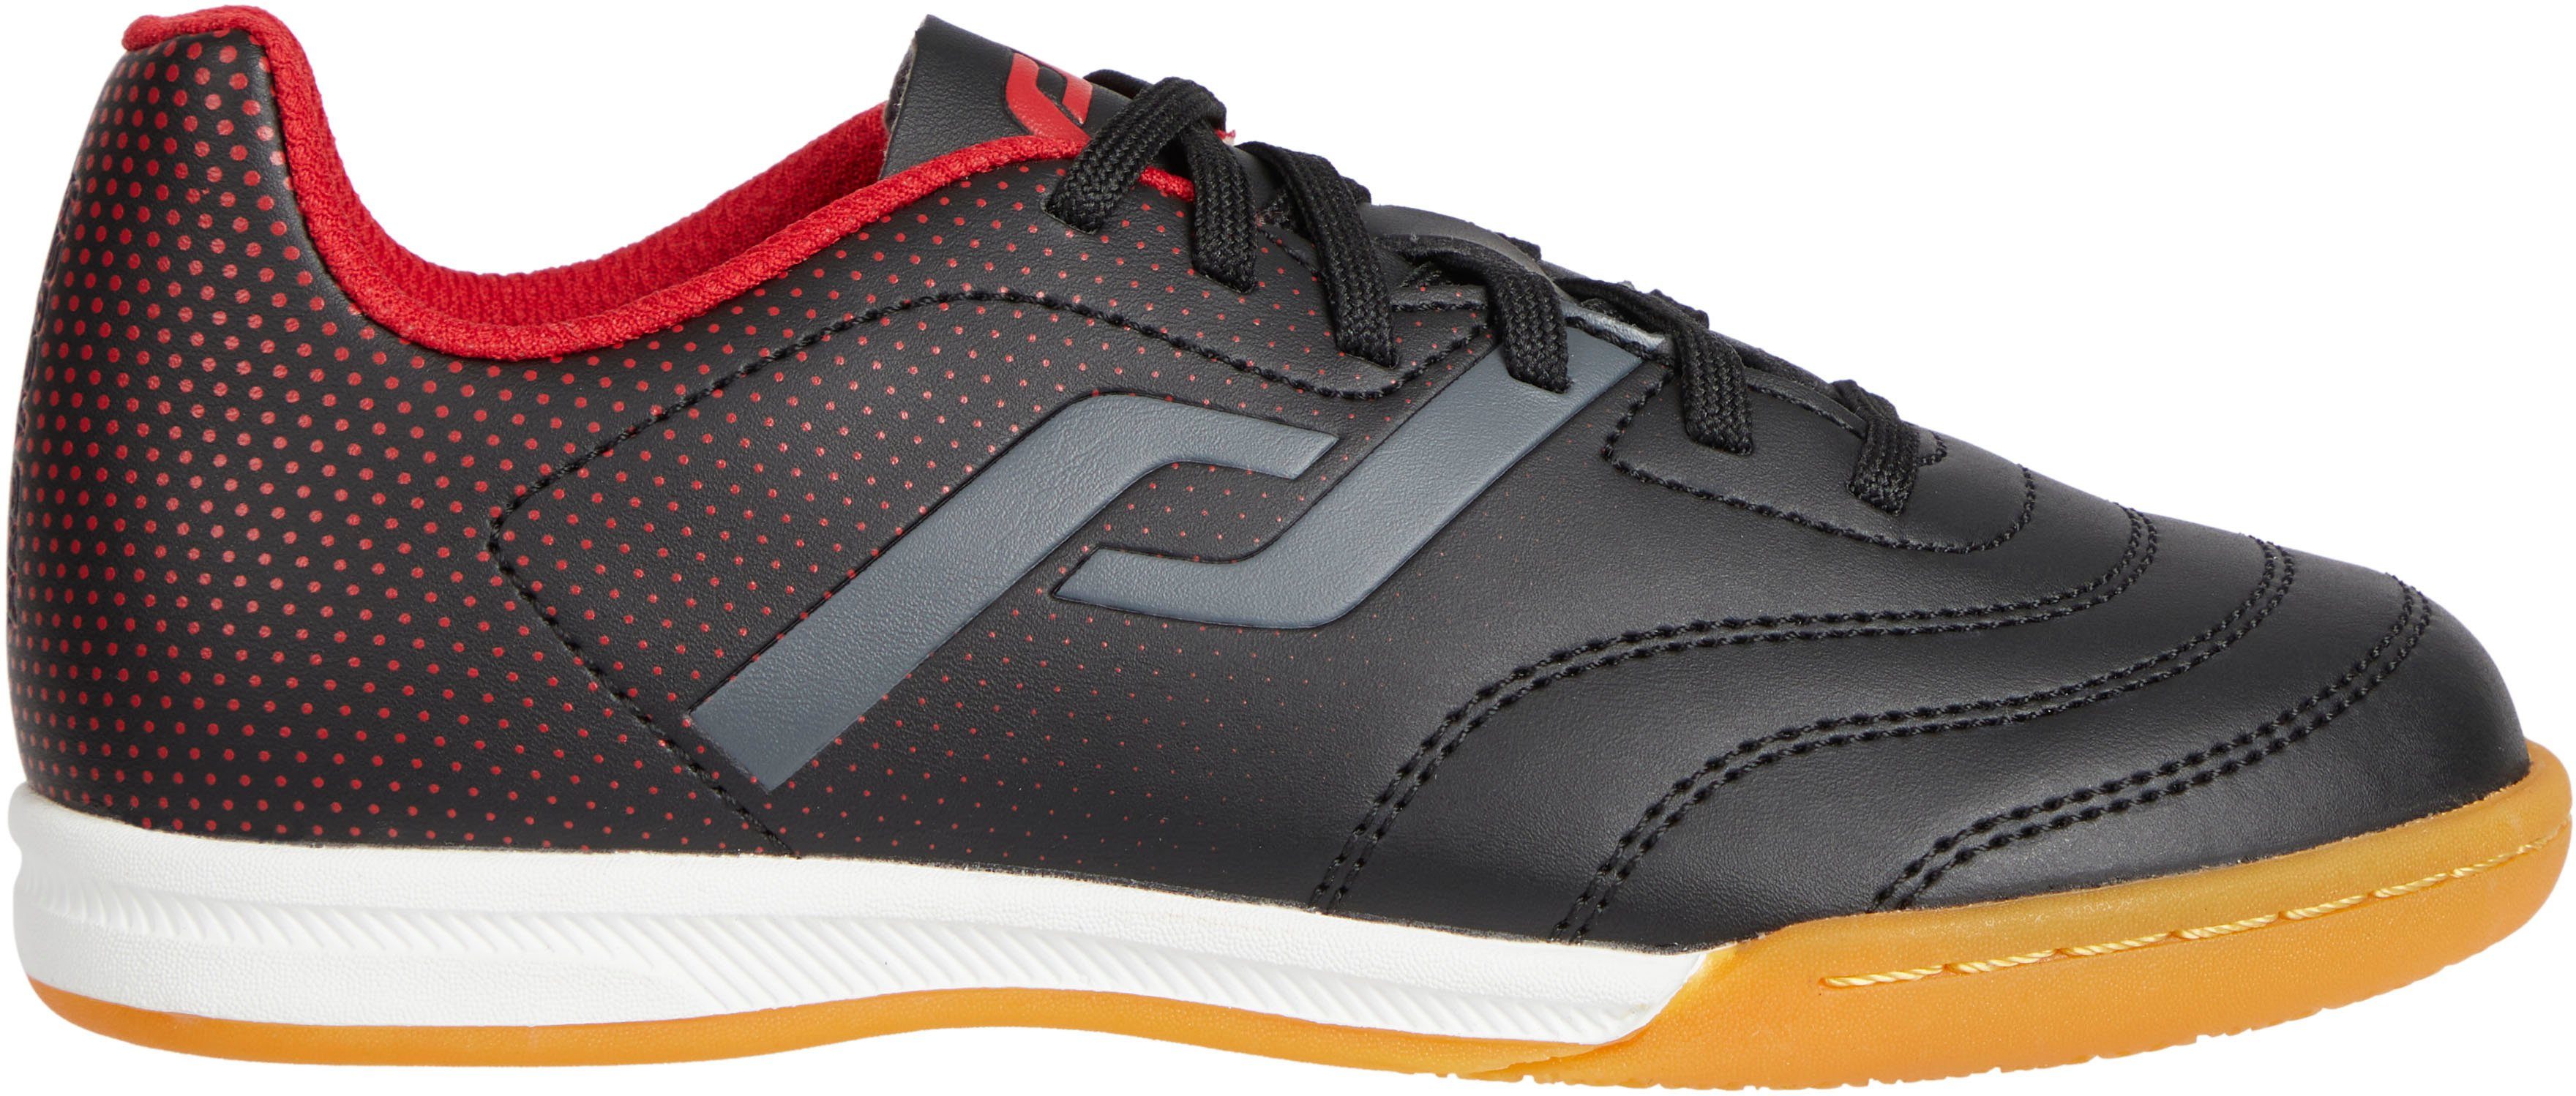 Pro IN Classic Fußballschuh BLACK/RED/ANTHRACITE III Touch Ind JR